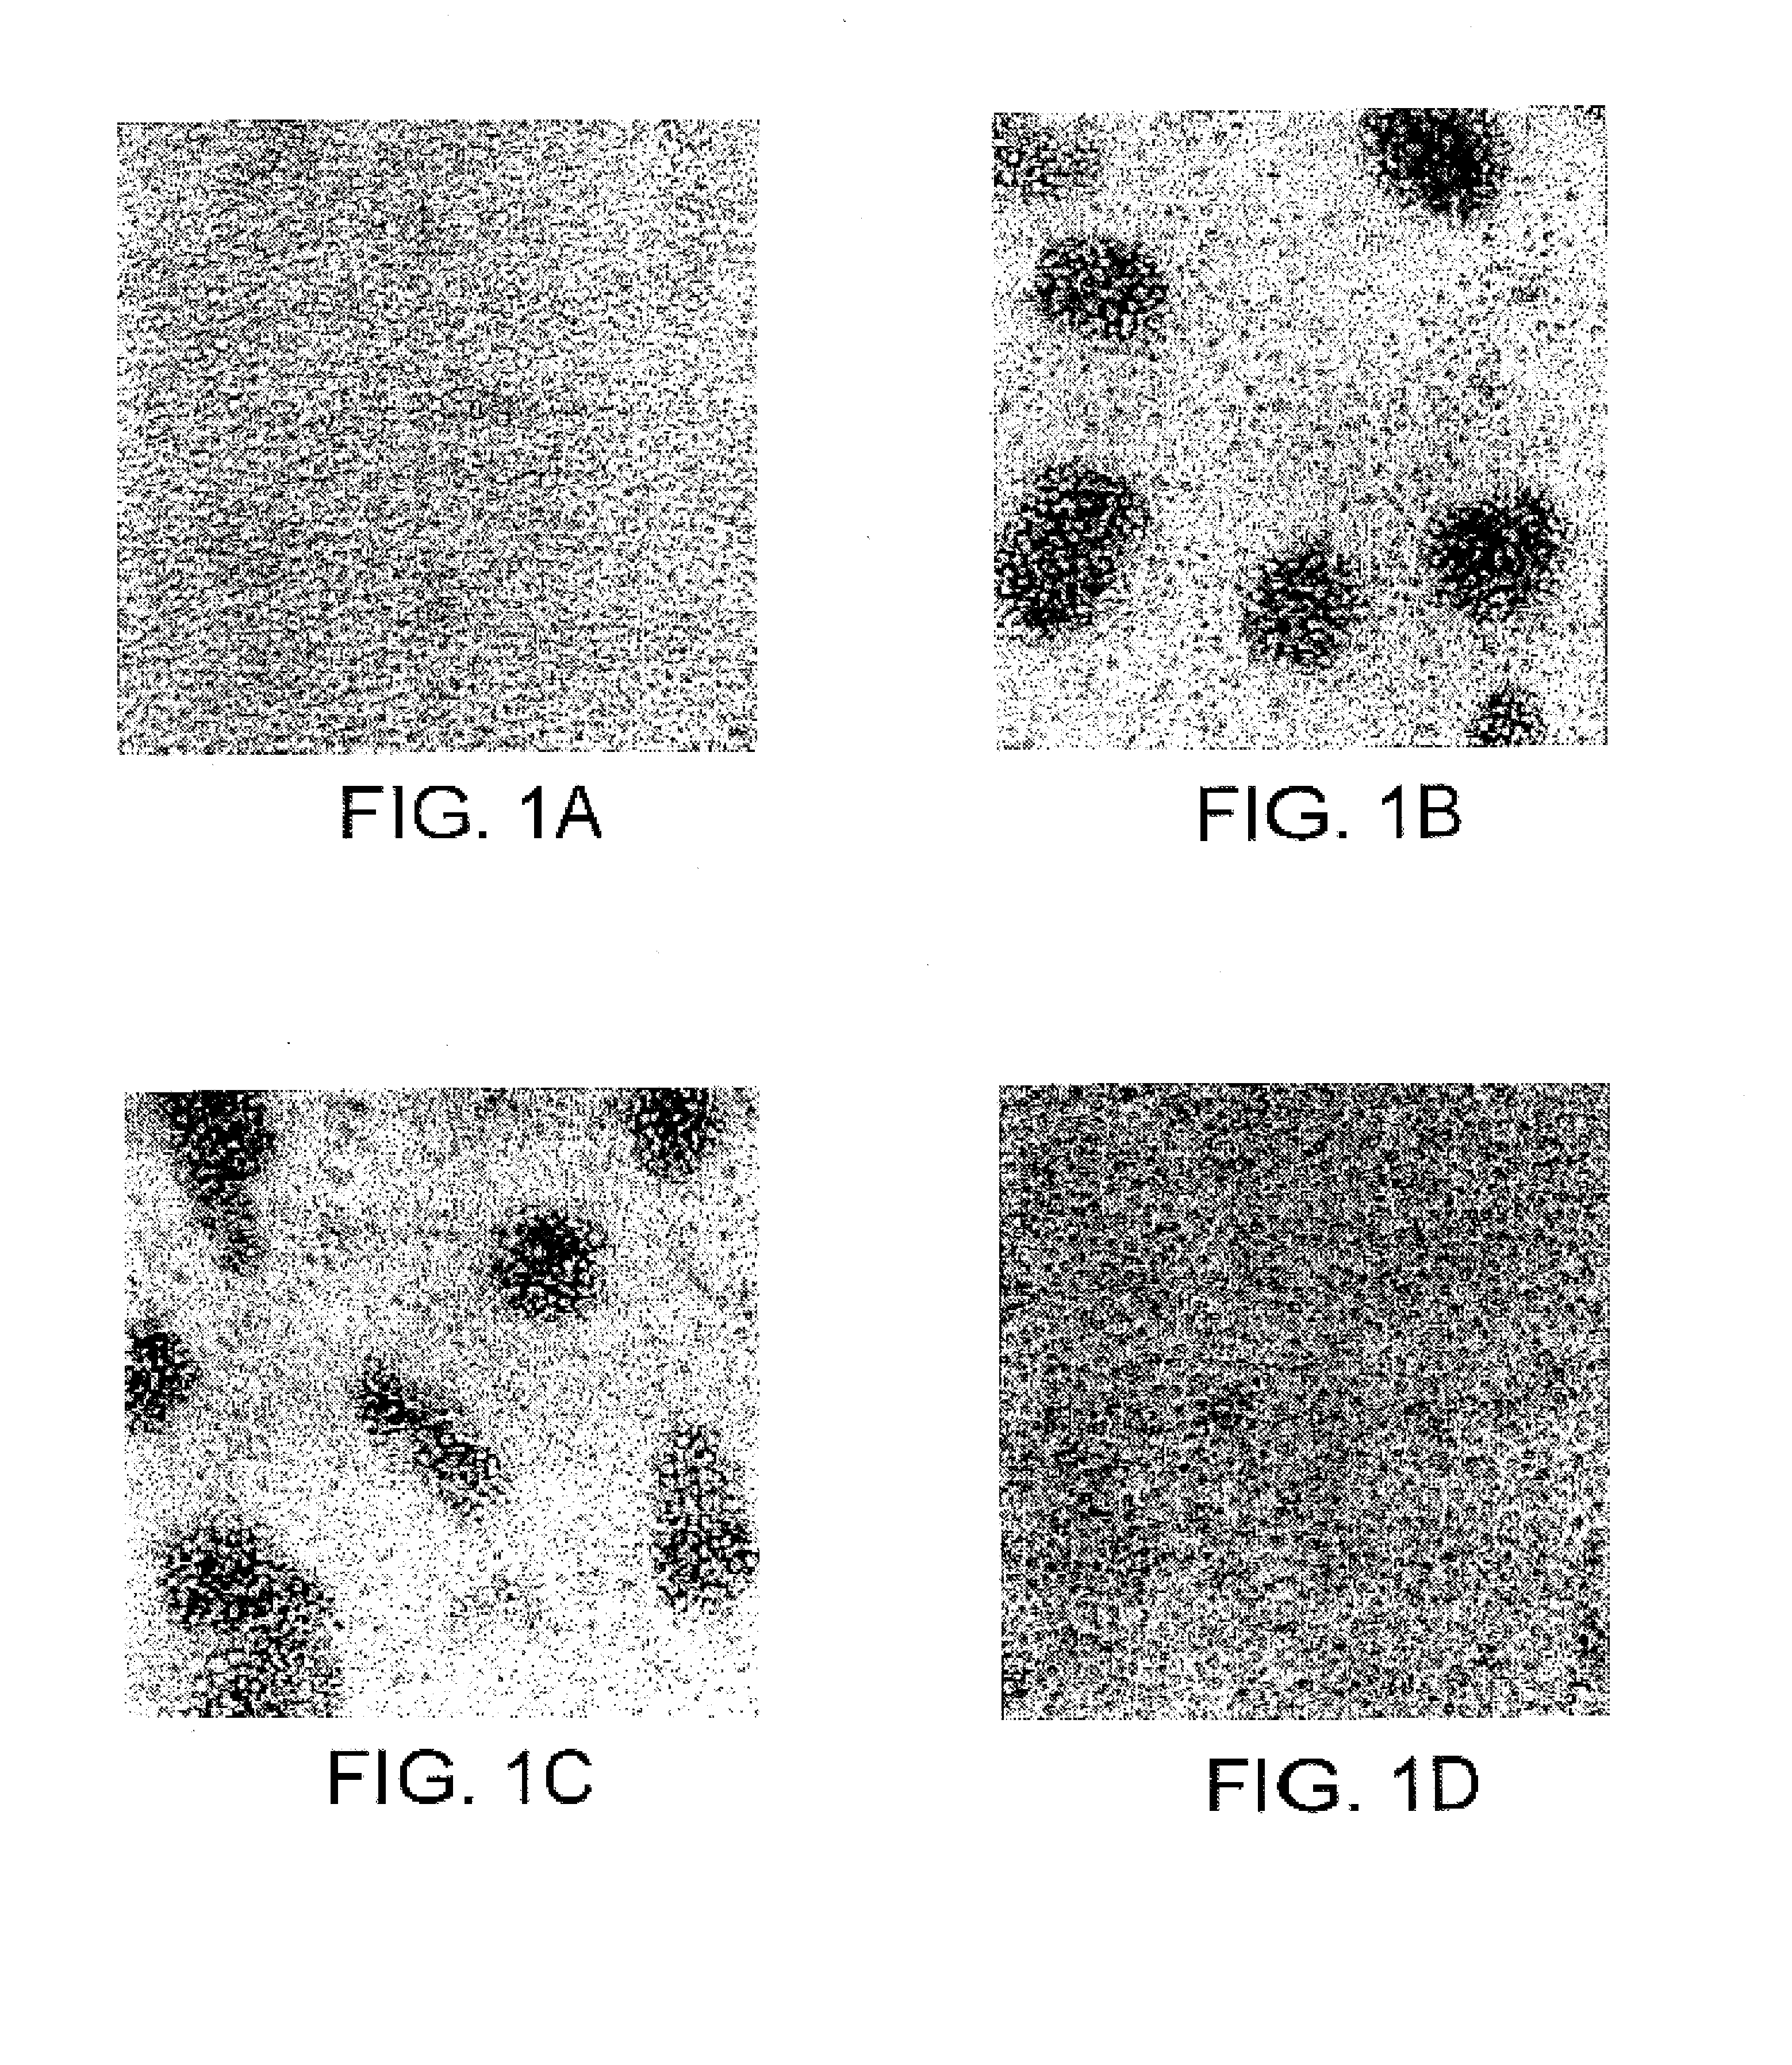 JTT-1 protein and methods of inhibiting lymphocyte activation